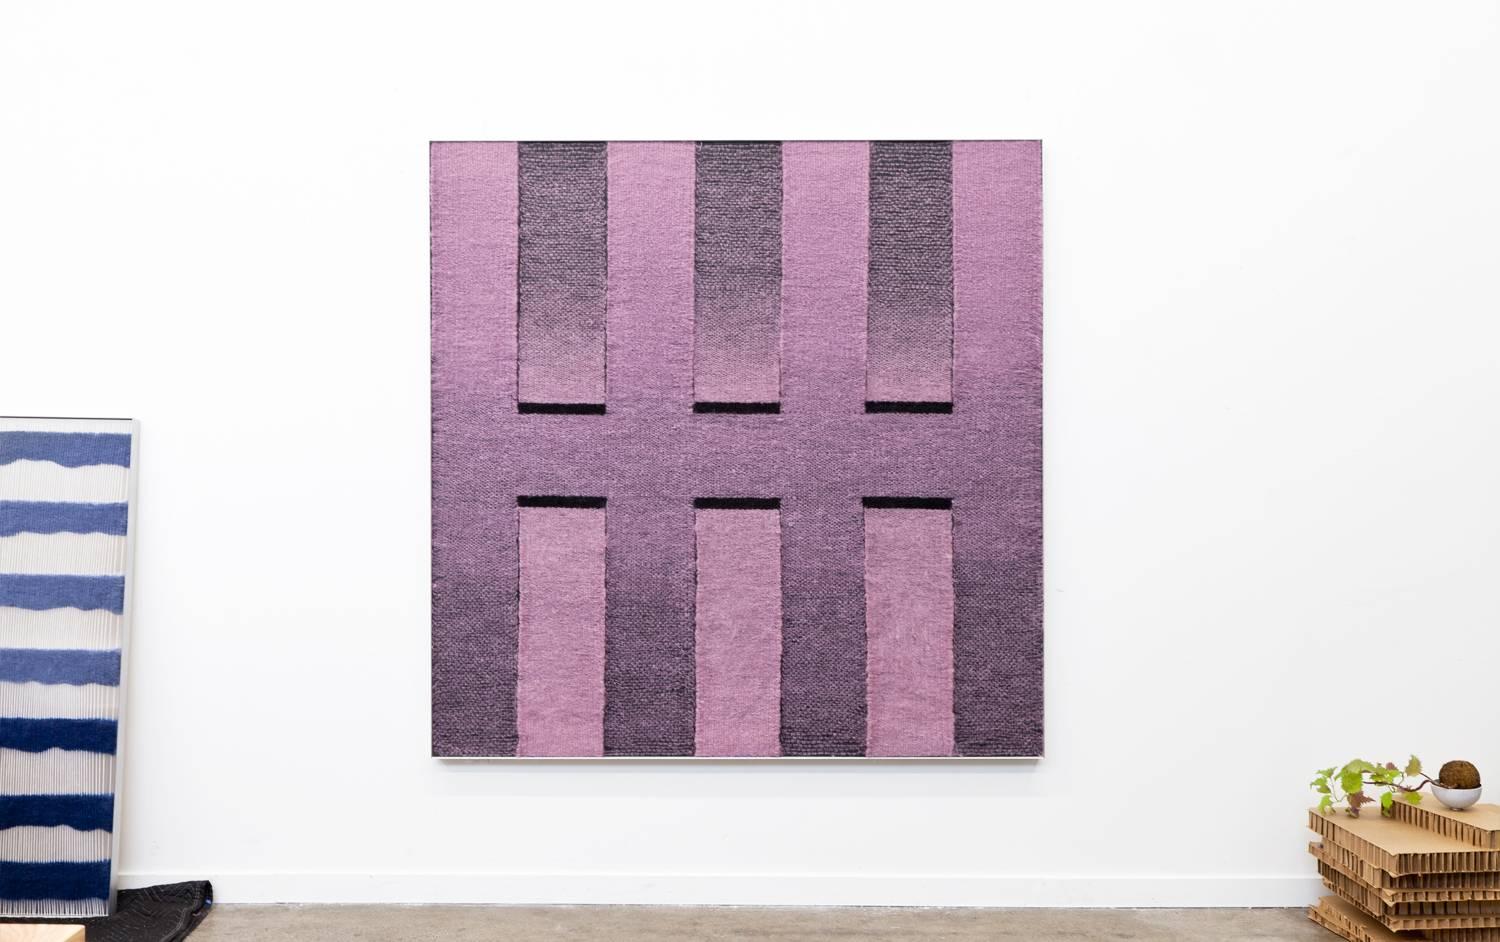 Brushed Contemporary Weaving Textile Fiber Art, Pink to Black Rectangles by Mimi Jung For Sale